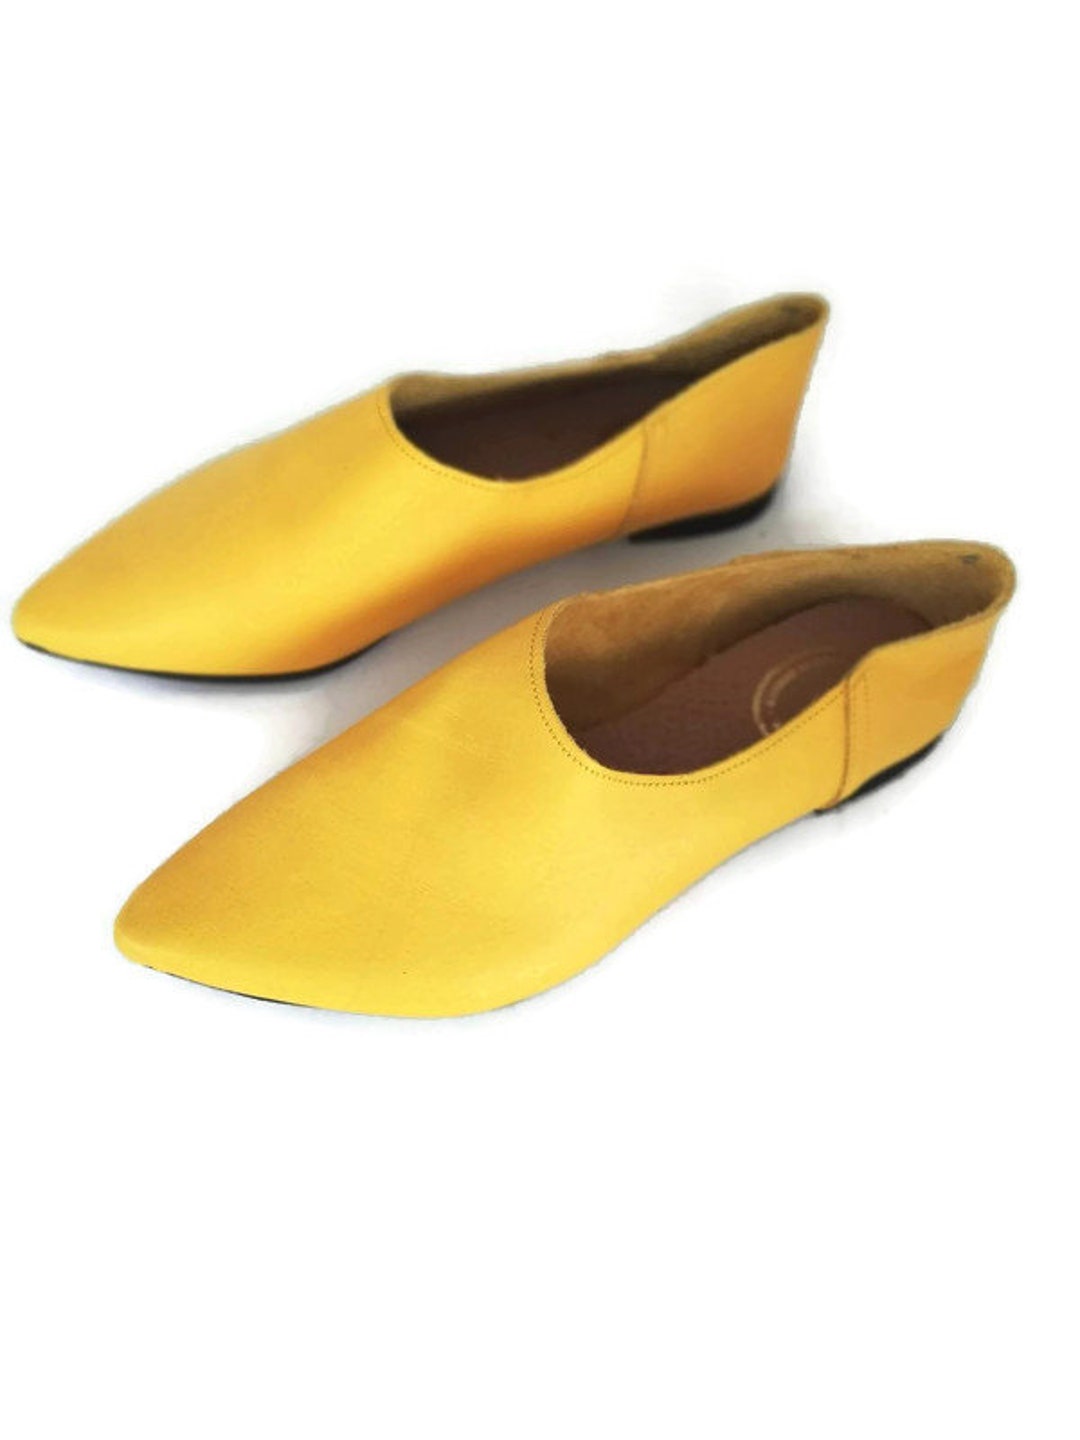 Leather Handmade Mustard Shoes Mules Pointed Shoes Soft - Etsy